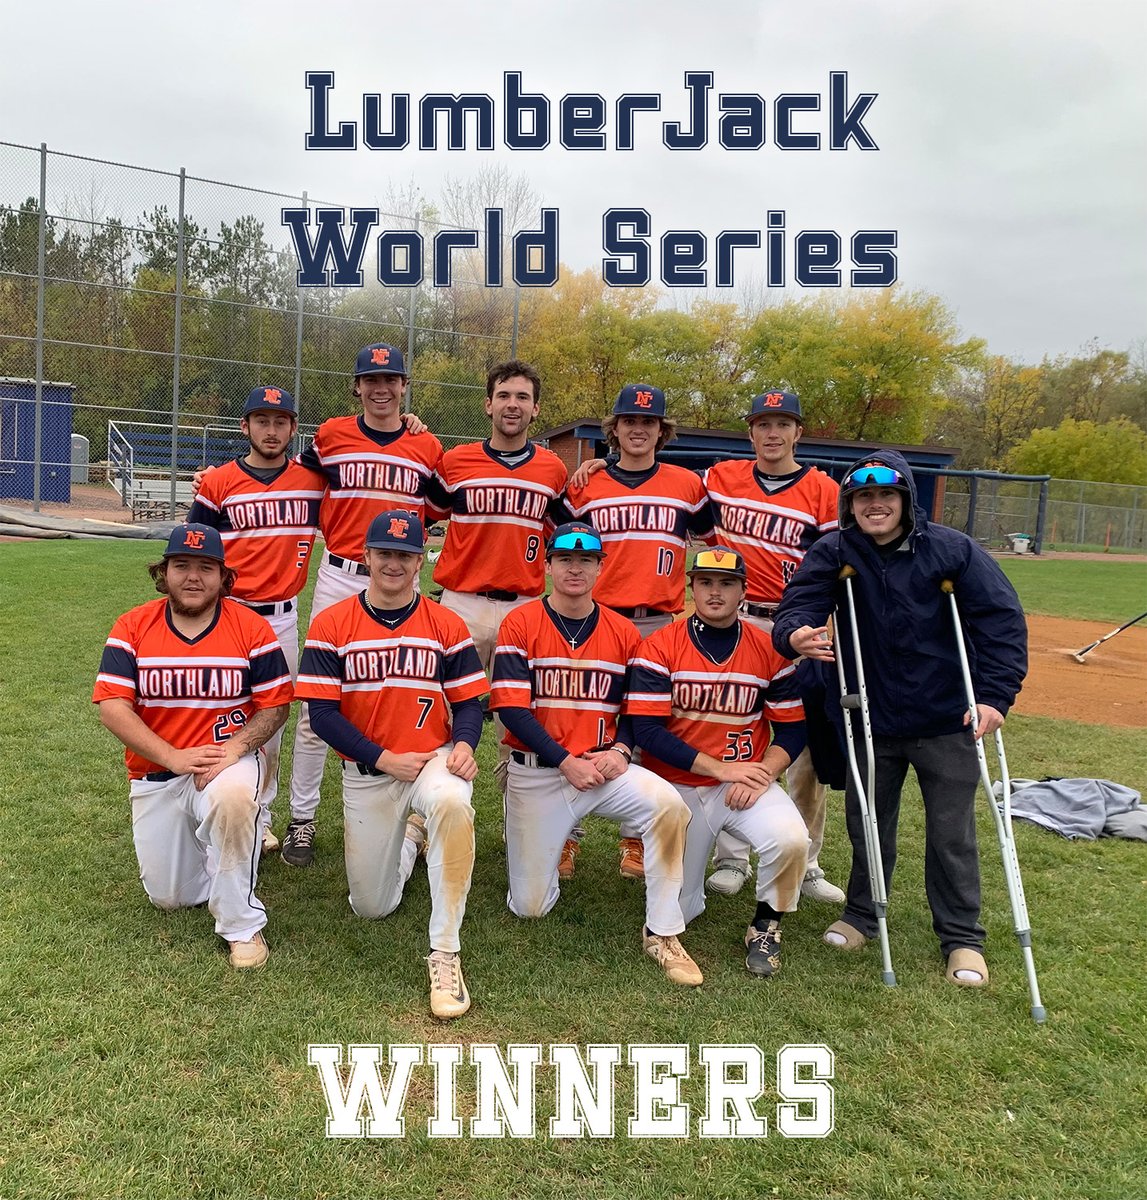 LumberJack Fall Ball was awesome!  Very driven group and great competition all around - now focus shifts to the off-season and seeing what guys can accomplish over the next few months! #sharpentheaxe